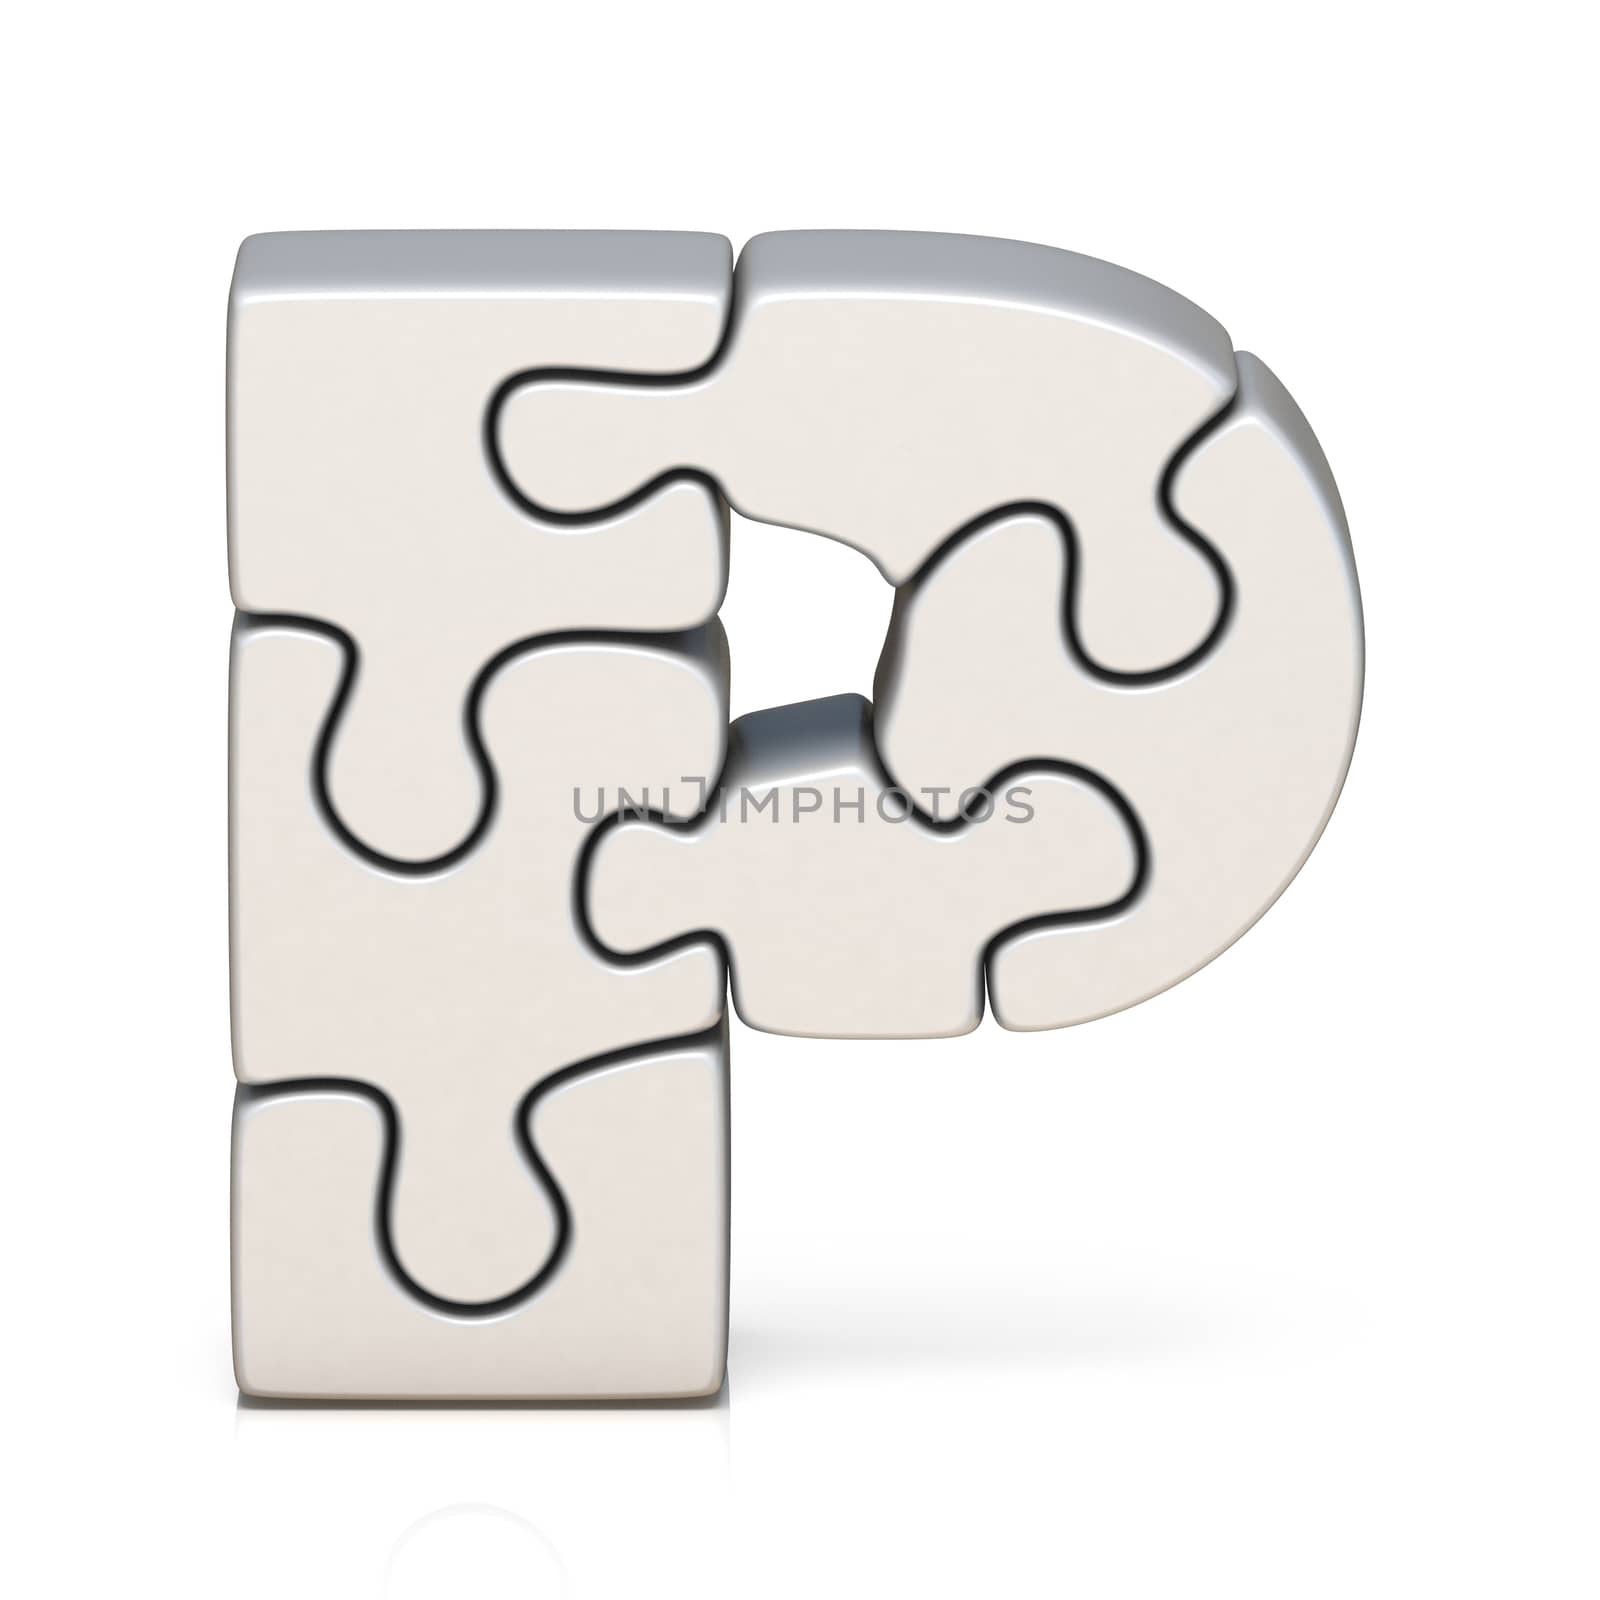 White puzzle jigsaw letter P 3D render illustration isolated on white background